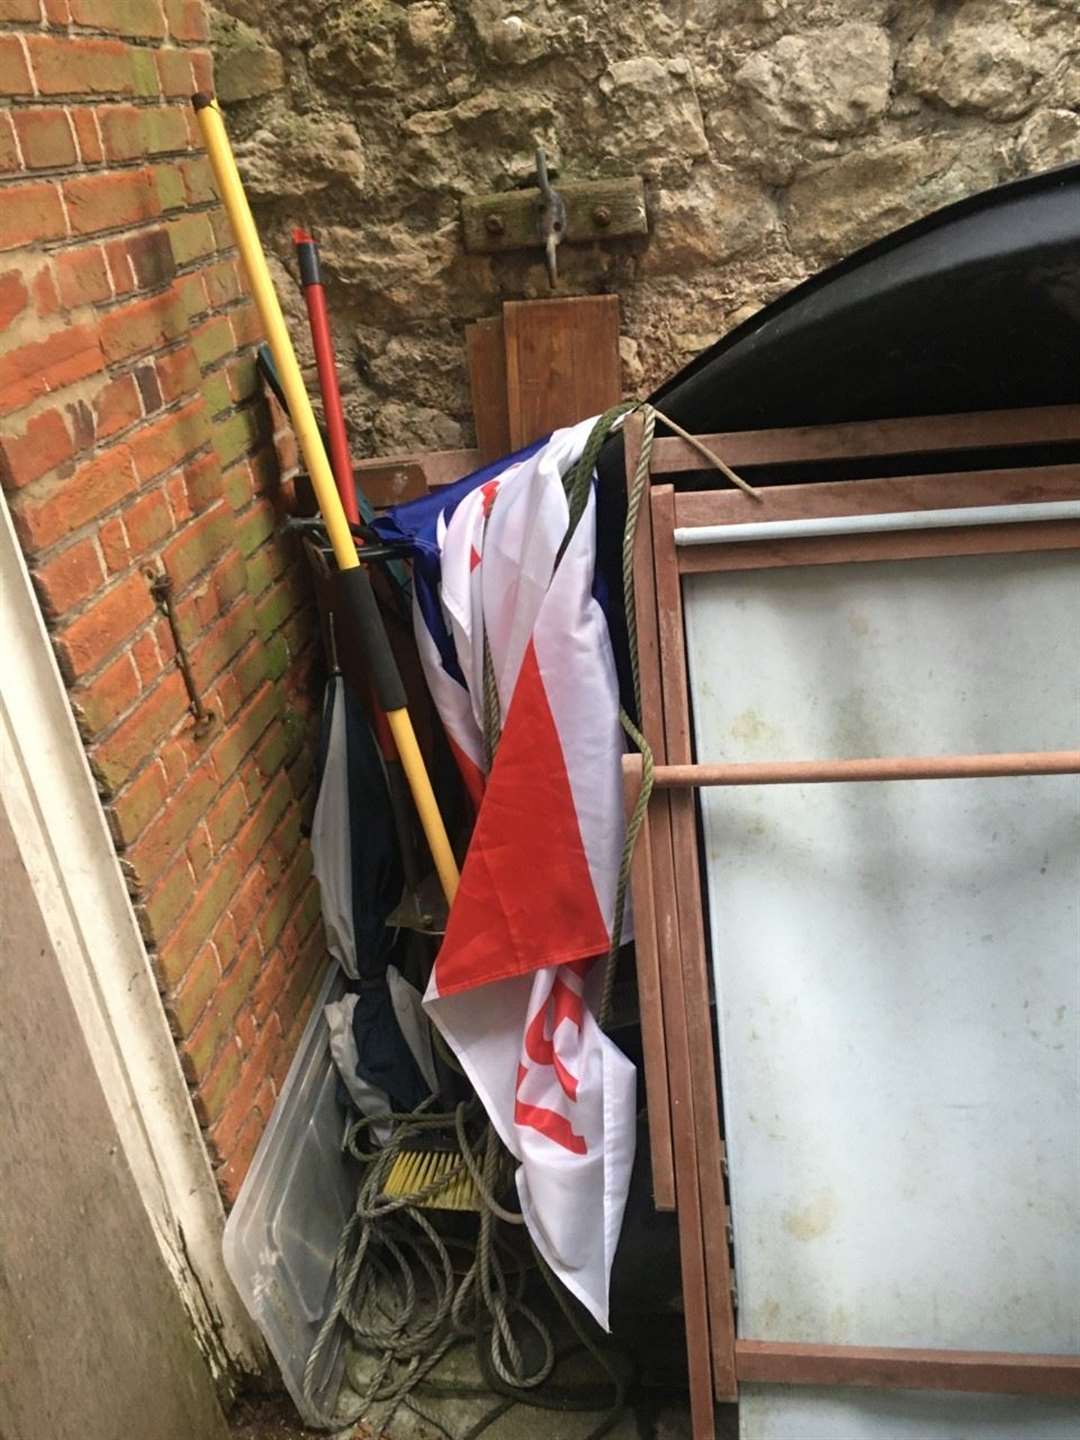 The armed forces flag was found to be cut down